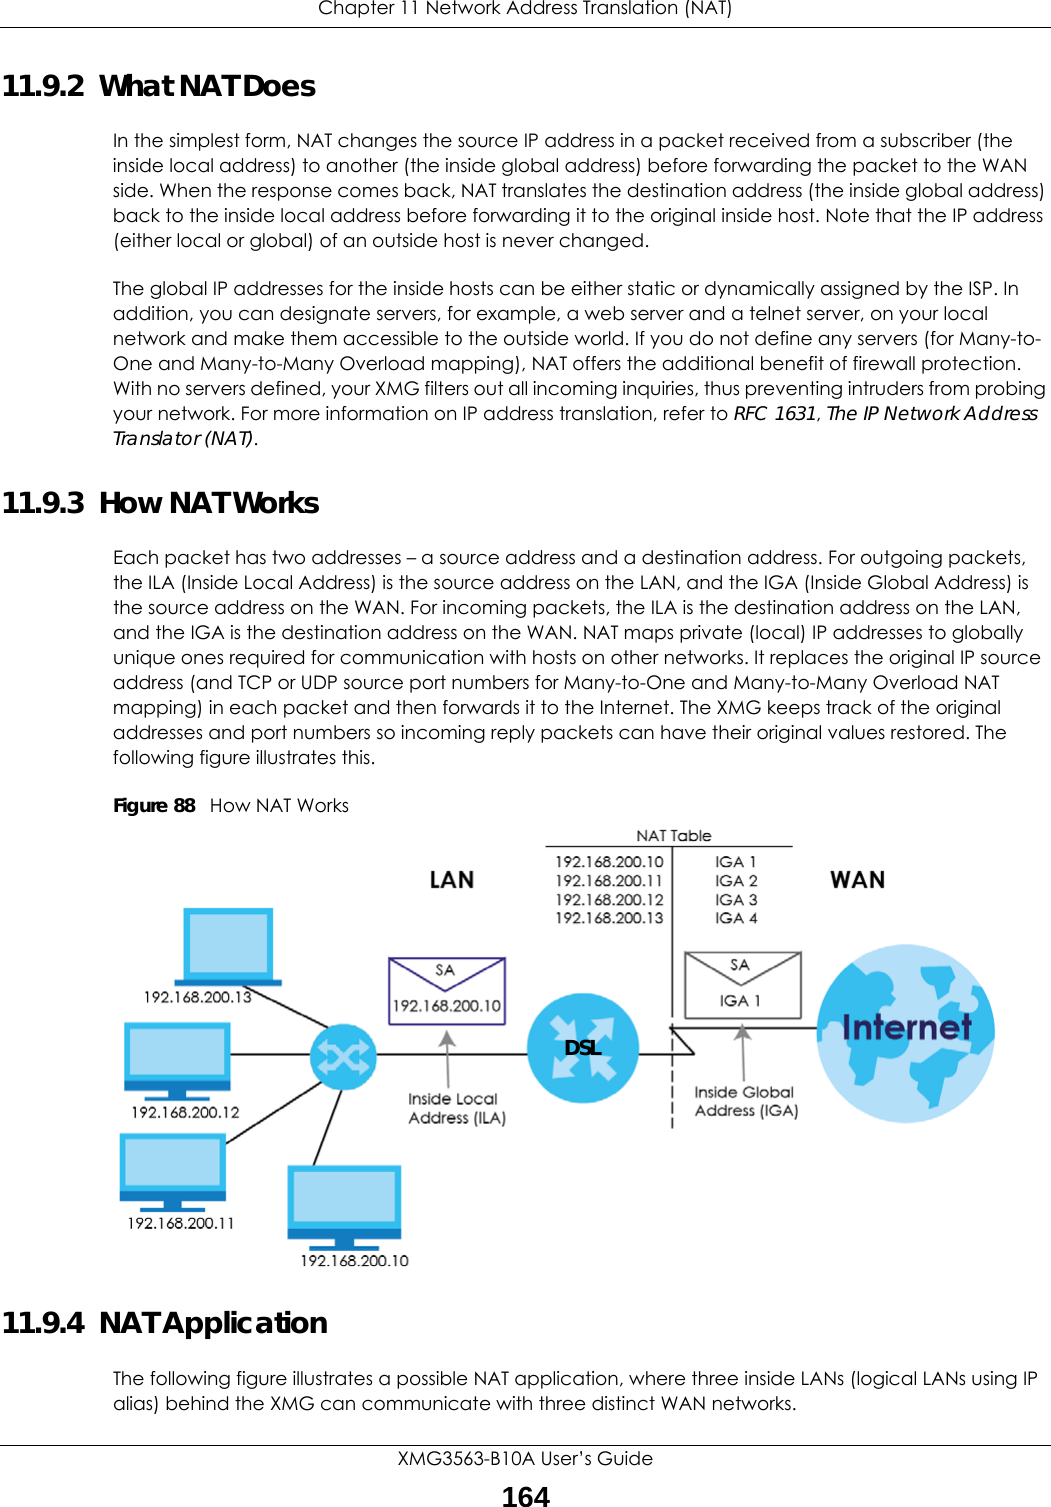 Chapter 11 Network Address Translation (NAT)XMG3563-B10A User’s Guide16411.9.2  What NAT DoesIn the simplest form, NAT changes the source IP address in a packet received from a subscriber (the inside local address) to another (the inside global address) before forwarding the packet to the WAN side. When the response comes back, NAT translates the destination address (the inside global address) back to the inside local address before forwarding it to the original inside host. Note that the IP address (either local or global) of an outside host is never changed.The global IP addresses for the inside hosts can be either static or dynamically assigned by the ISP. In addition, you can designate servers, for example, a web server and a telnet server, on your local network and make them accessible to the outside world. If you do not define any servers (for Many-to-One and Many-to-Many Overload mapping), NAT offers the additional benefit of firewall protection. With no servers defined, your XMG filters out all incoming inquiries, thus preventing intruders from probing your network. For more information on IP address translation, refer to RFC 1631, The IP Network Address Translator (NAT).11.9.3  How NAT WorksEach packet has two addresses – a source address and a destination address. For outgoing packets, the ILA (Inside Local Address) is the source address on the LAN, and the IGA (Inside Global Address) is the source address on the WAN. For incoming packets, the ILA is the destination address on the LAN, and the IGA is the destination address on the WAN. NAT maps private (local) IP addresses to globally unique ones required for communication with hosts on other networks. It replaces the original IP source address (and TCP or UDP source port numbers for Many-to-One and Many-to-Many Overload NAT mapping) in each packet and then forwards it to the Internet. The XMG keeps track of the original addresses and port numbers so incoming reply packets can have their original values restored. The following figure illustrates this.Figure 88   How NAT Works11.9.4  NAT ApplicationThe following figure illustrates a possible NAT application, where three inside LANs (logical LANs using IP alias) behind the XMG can communicate with three distinct WAN networks.DSL